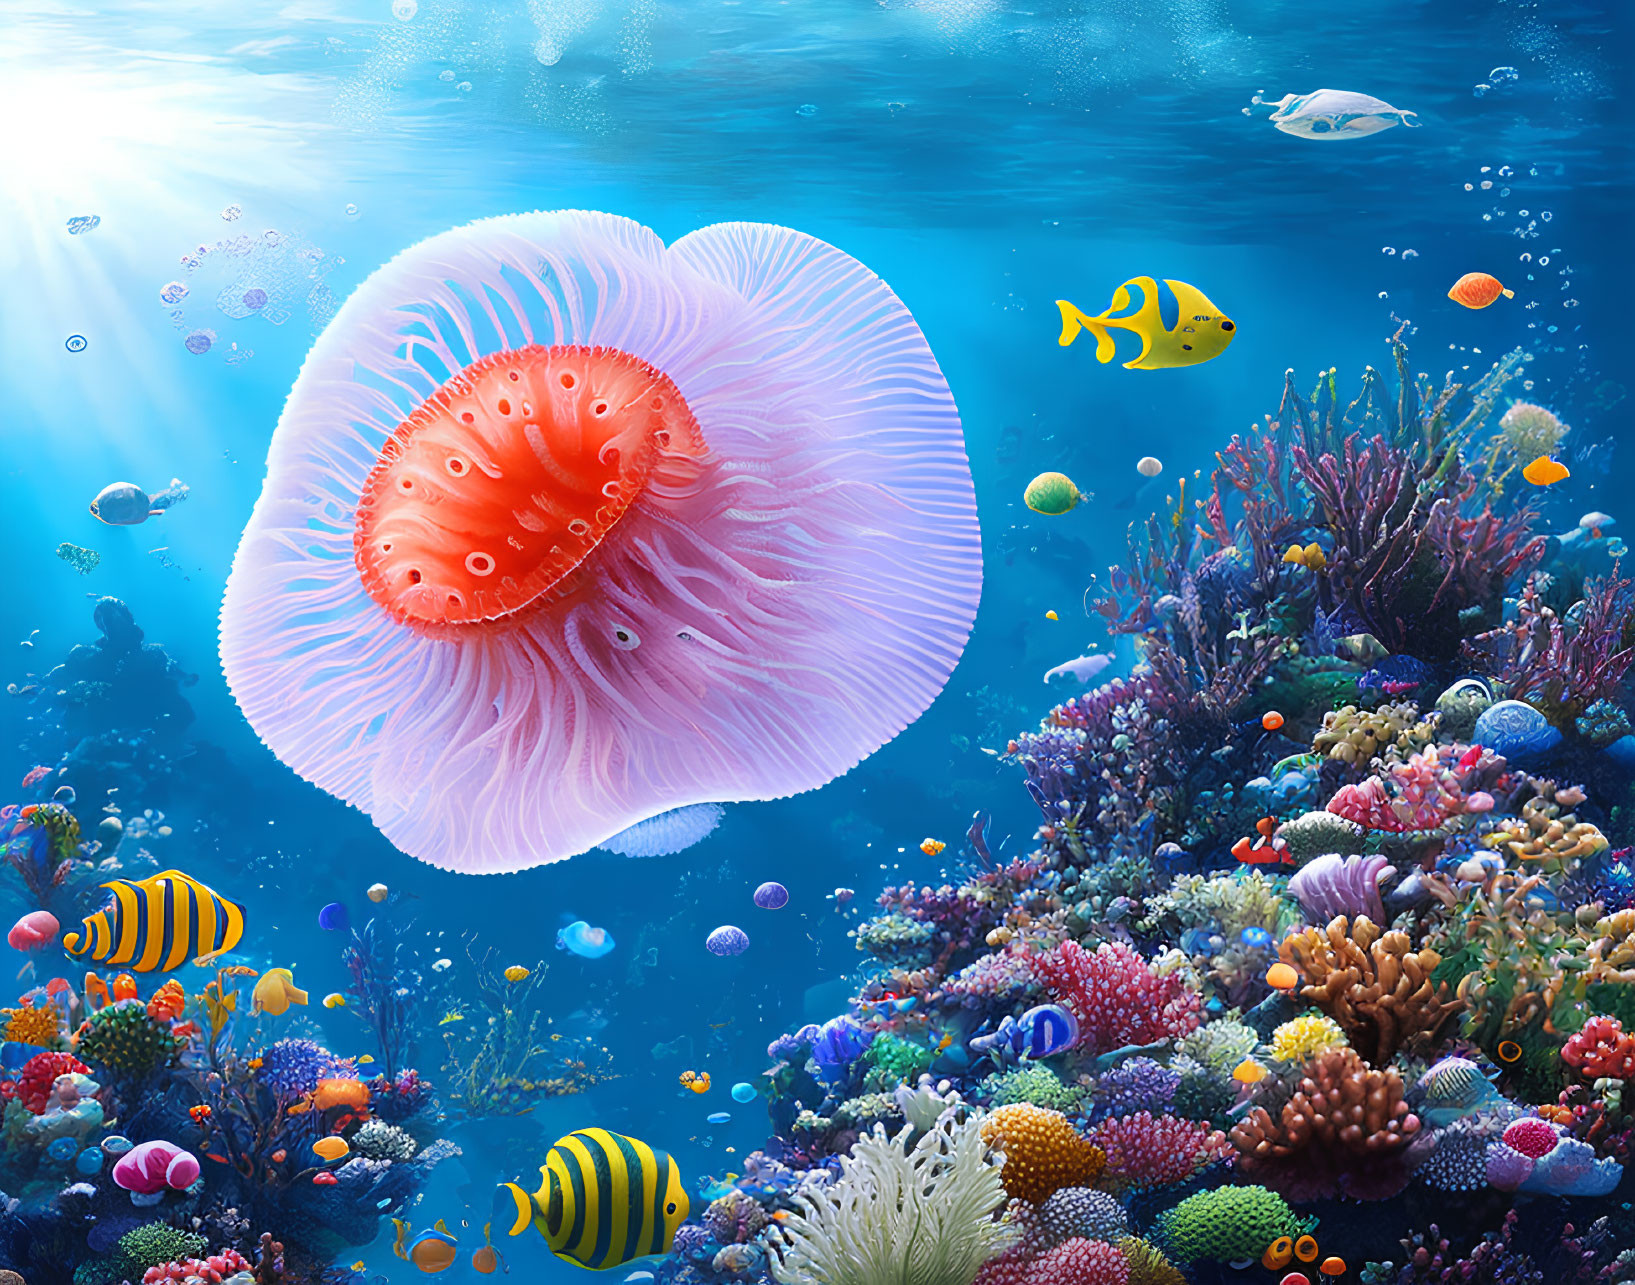 Colorful Underwater Scene with Pink Jellyfish and Coral Reef